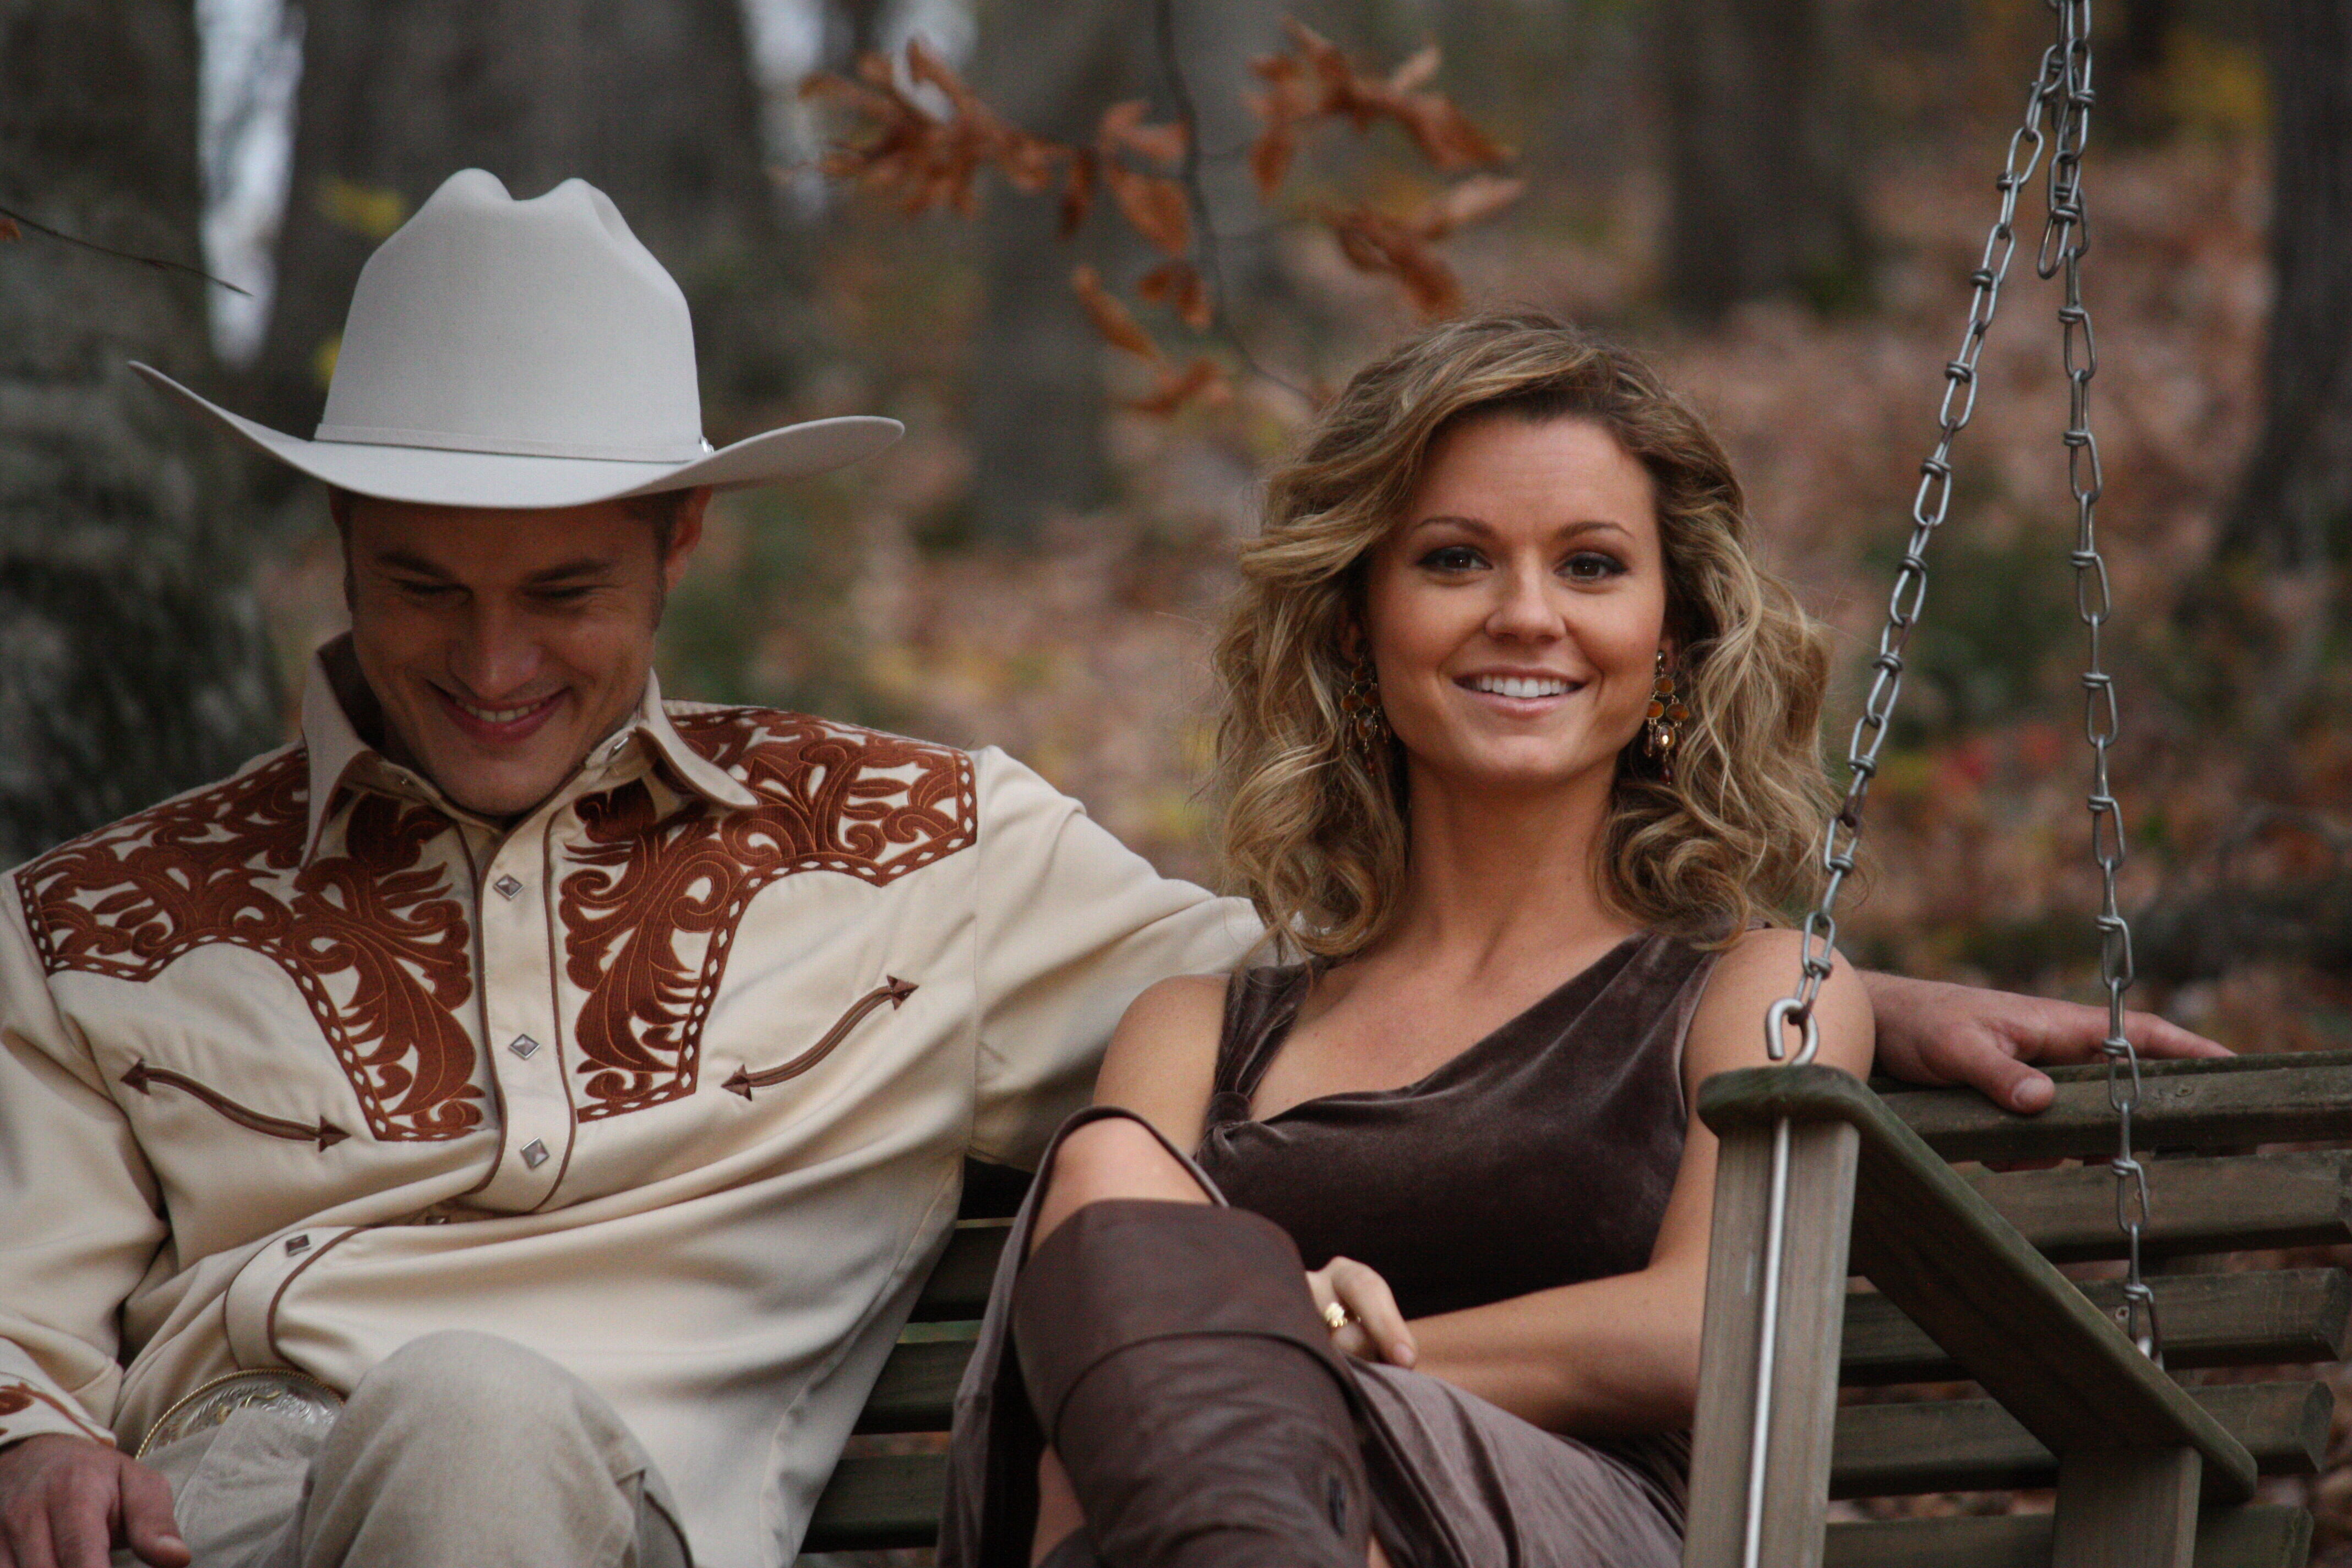 Still of Katrina Elam in Pure Country 2: The Gift (2010)